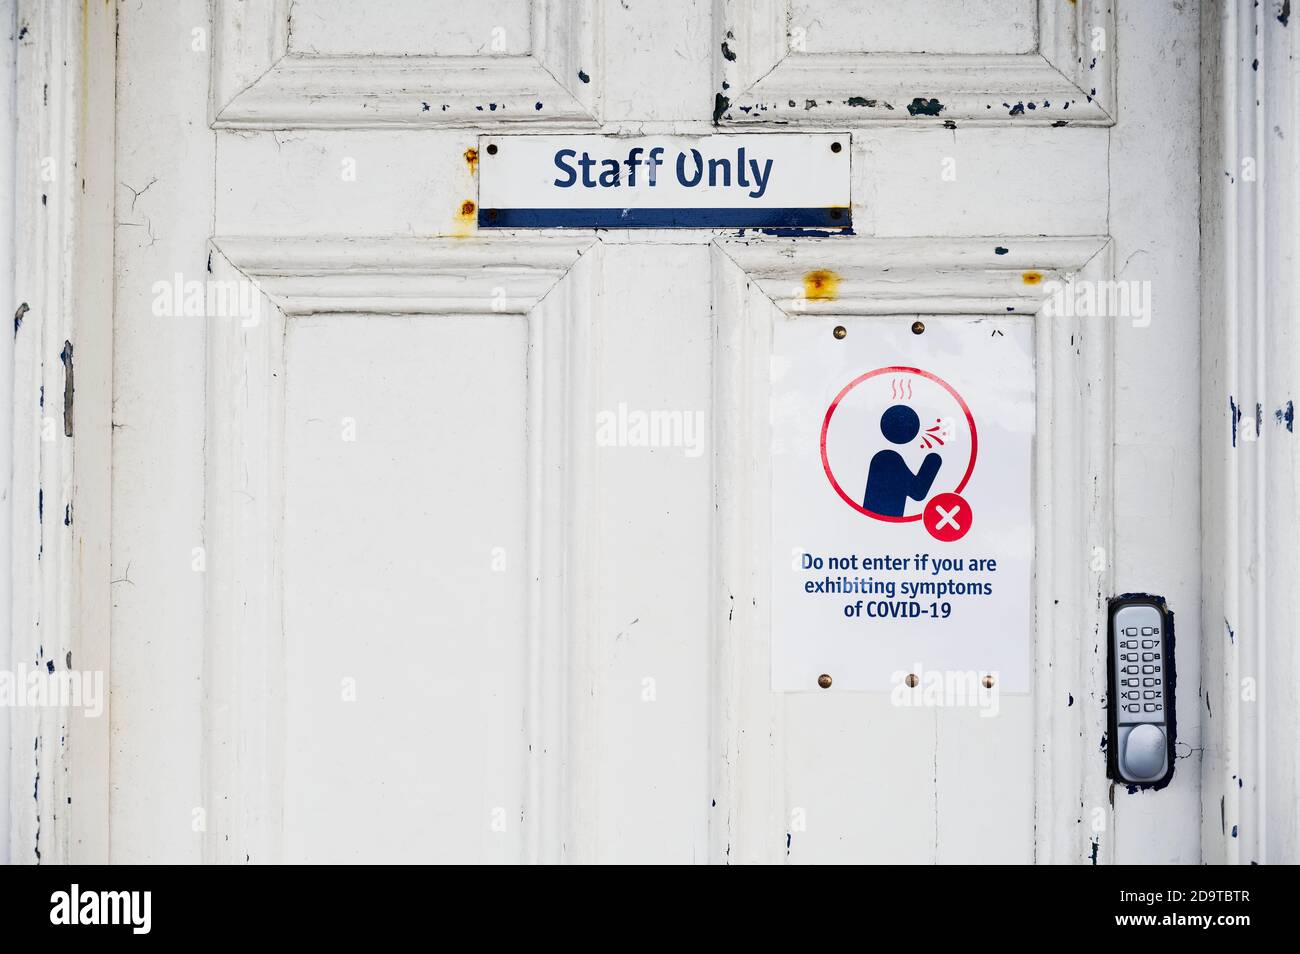 Staff sign do not enter if exhibiting symptoms of covid-19 Stock Photo